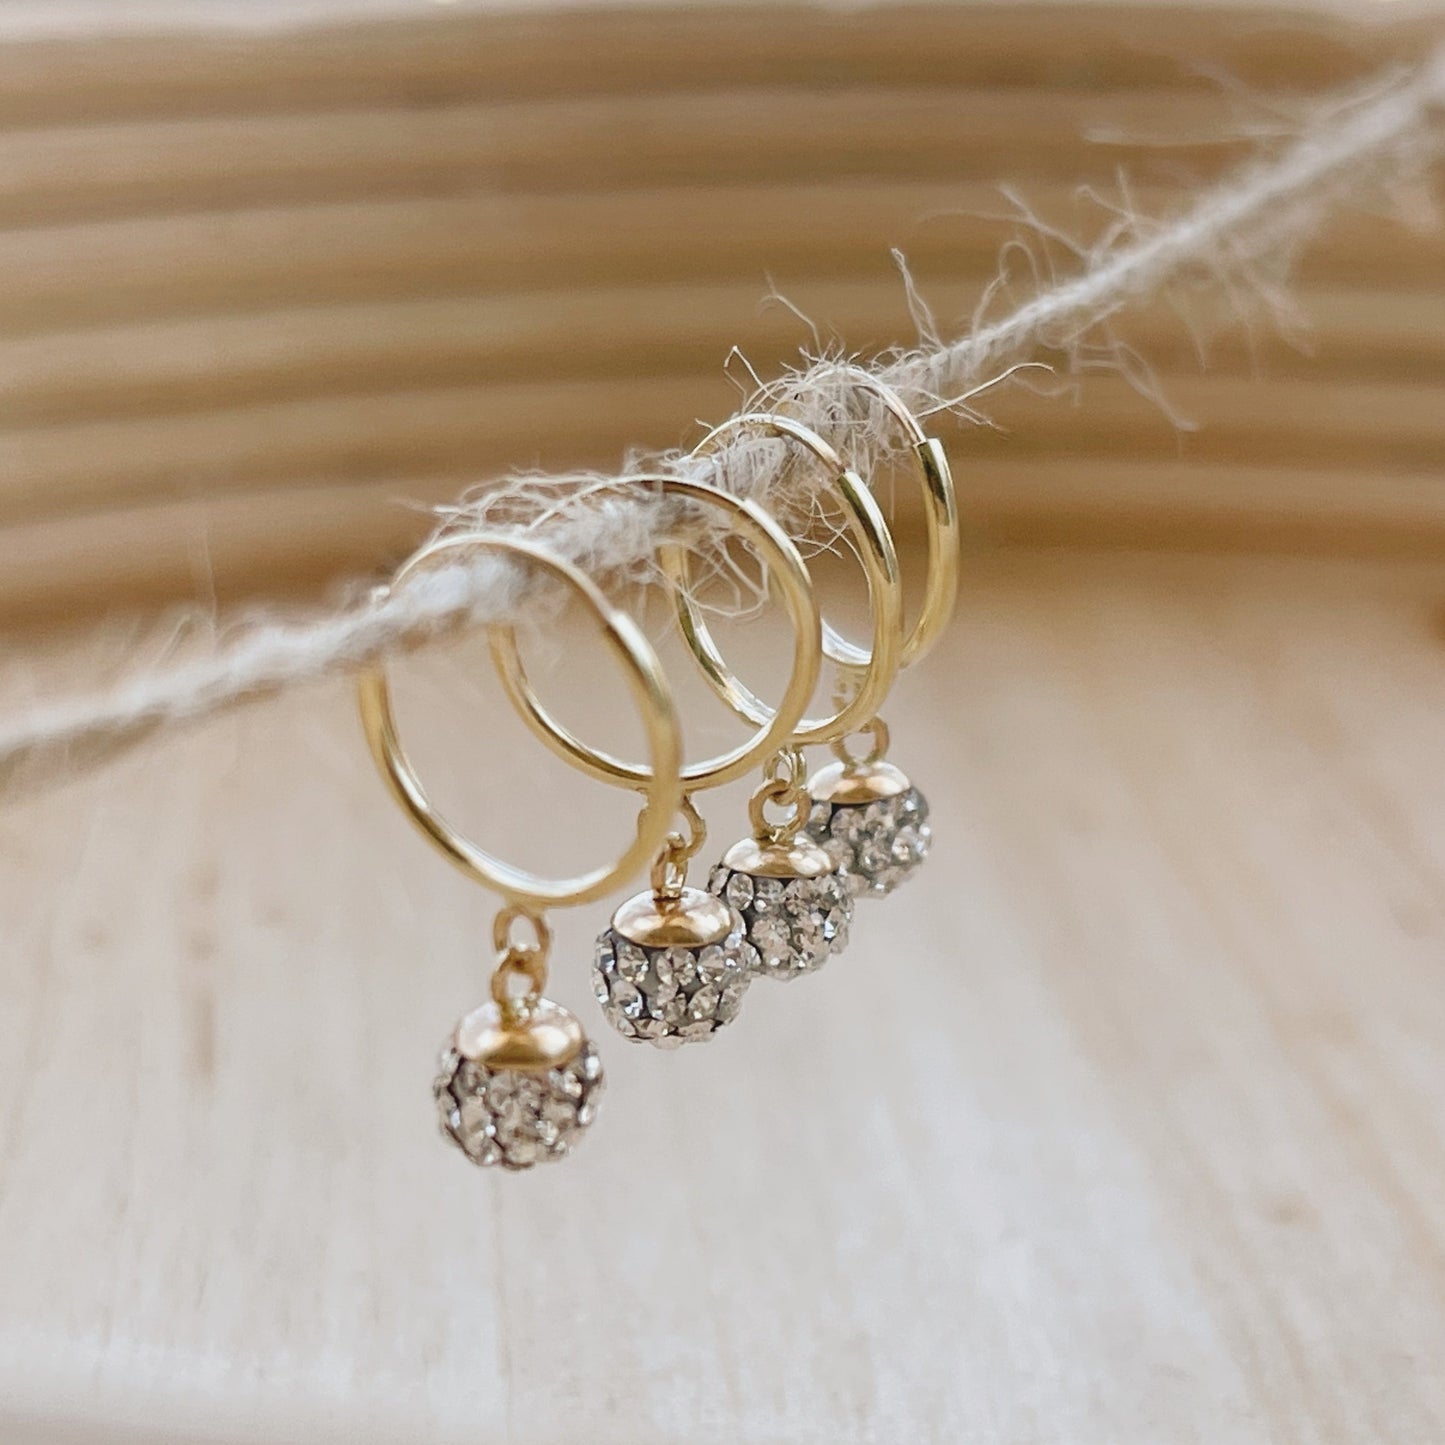 Load image into Gallery viewer, This minimalist gold hoop earrings are perfect for any occasion, from bridal parties to everyday wear. They are lightweight and simple.
